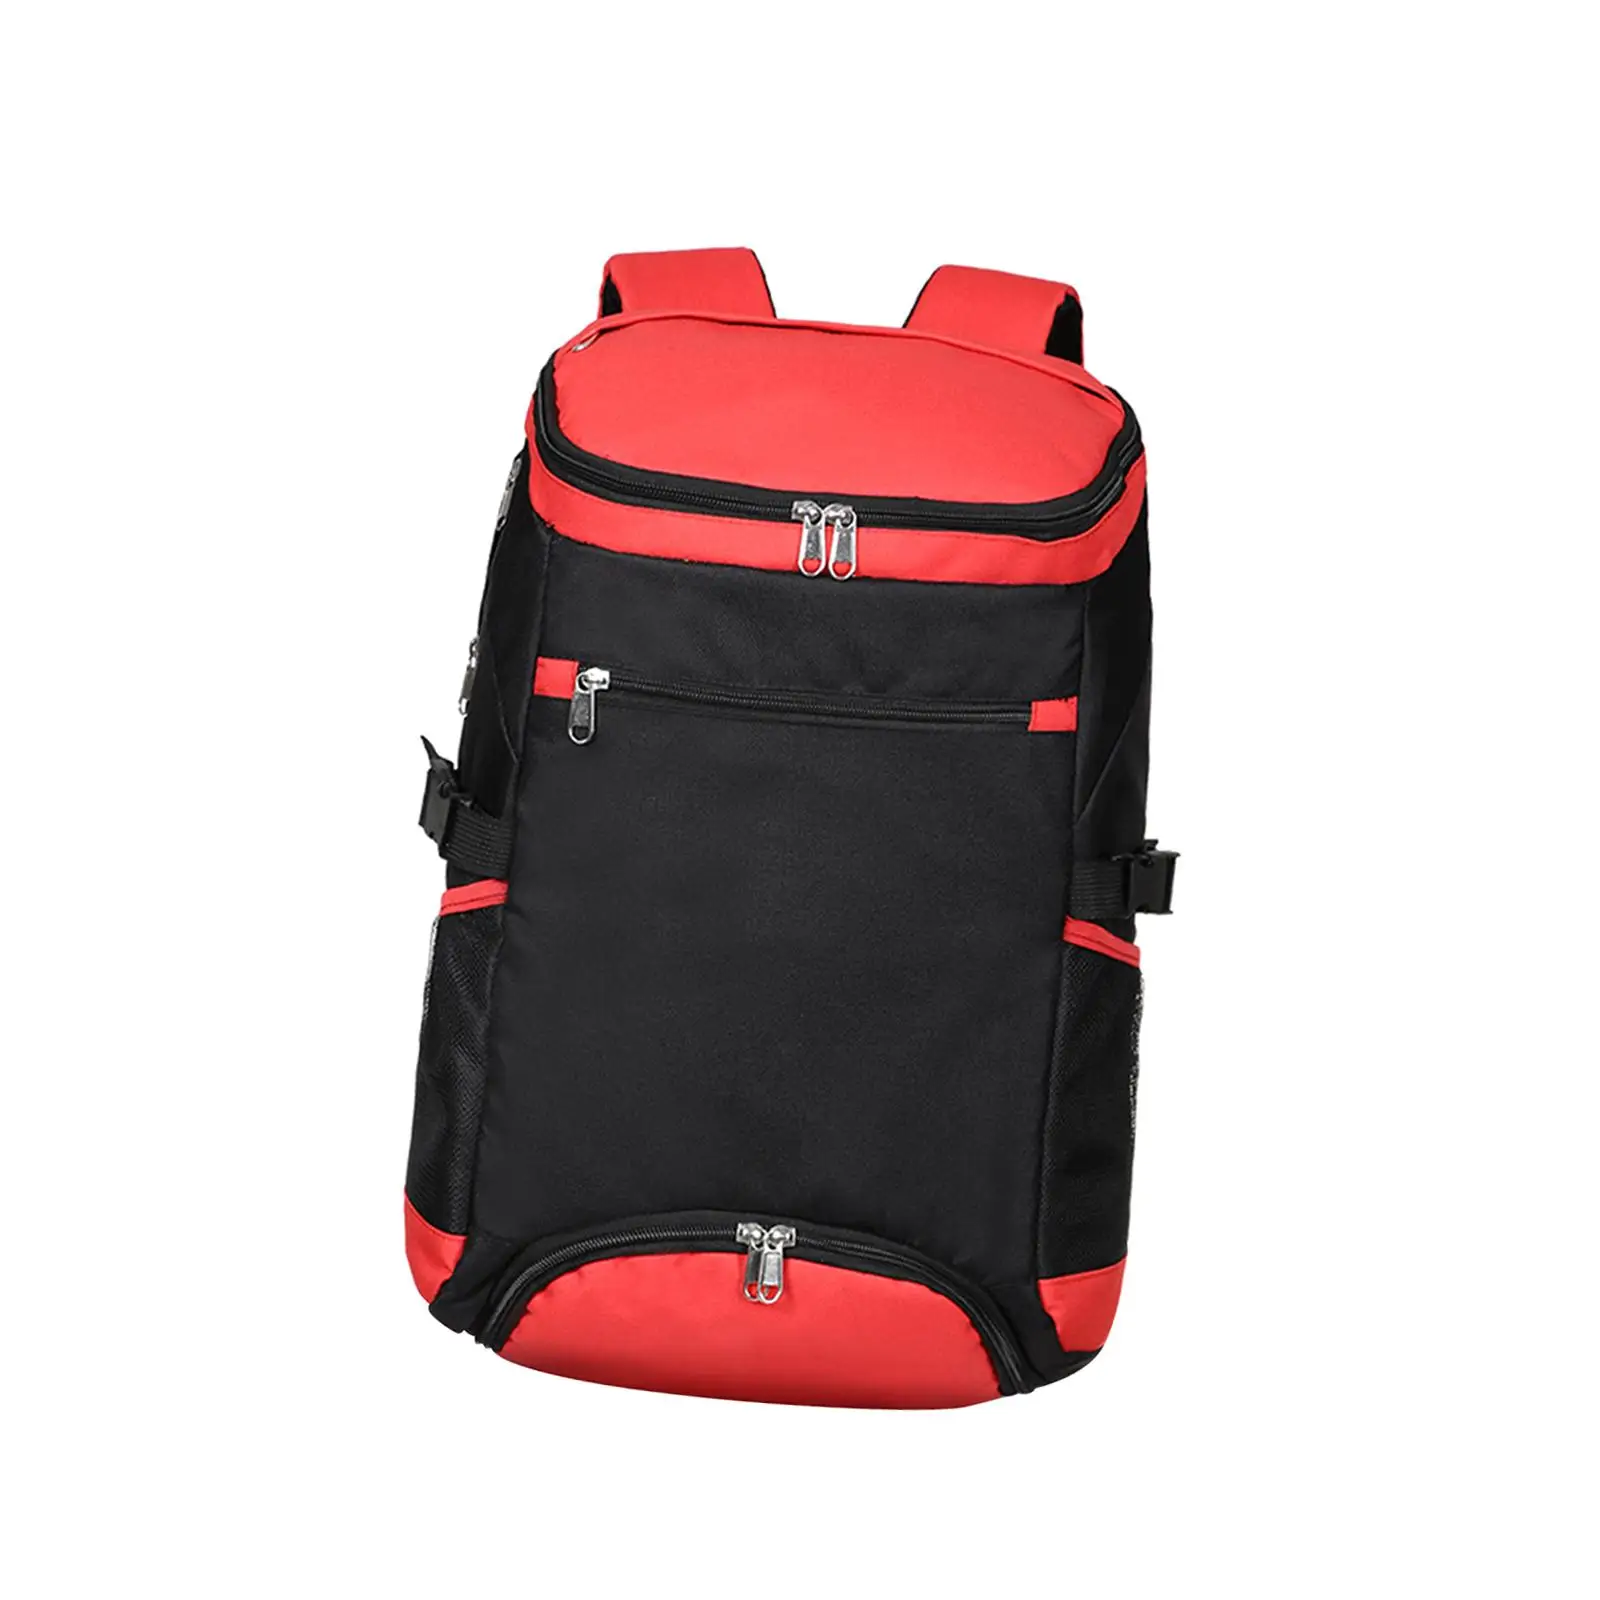 Tennis Backpack with Shoe Compartment Badminton Backpack Tennis Bag for Badminton Squash Racquets 2 Rackets Balls Accessories